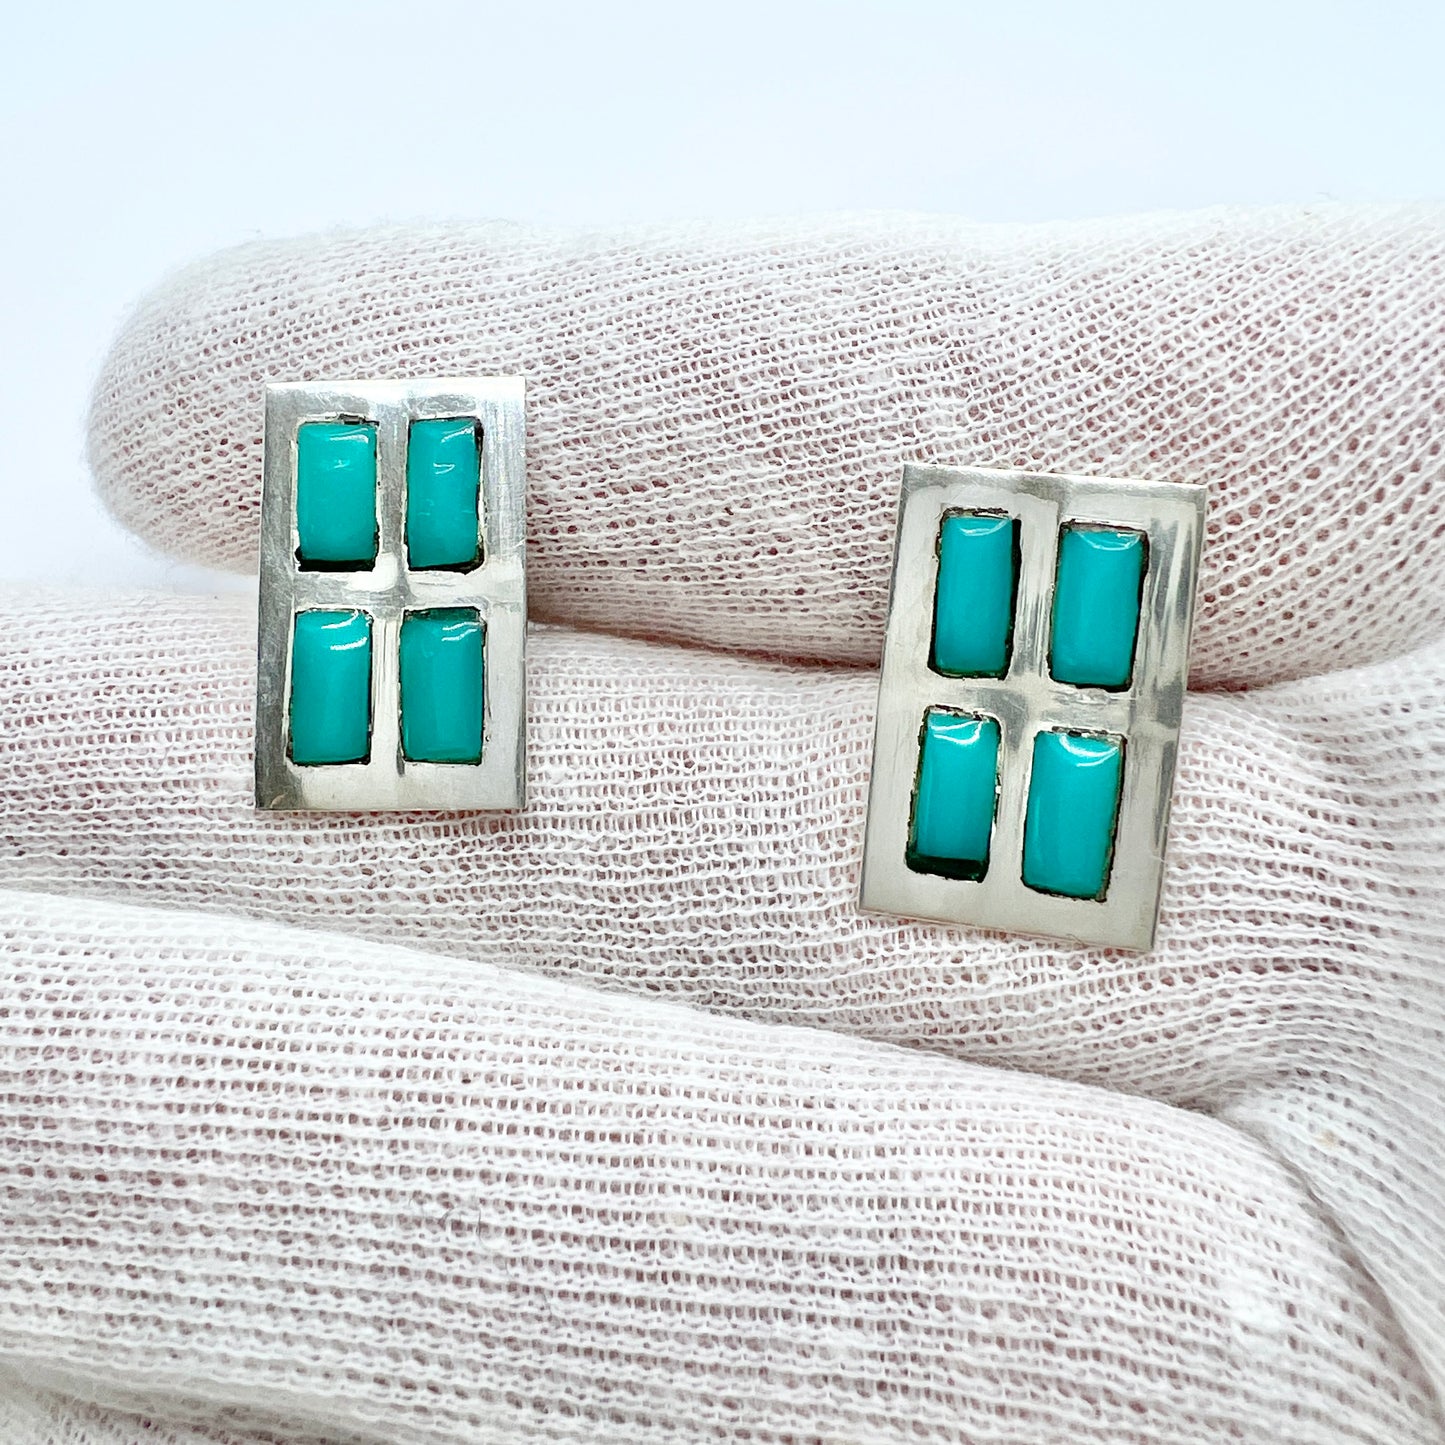 Mexico 1950-60s Silver Turquoise Cufflinks. Maker's Mark